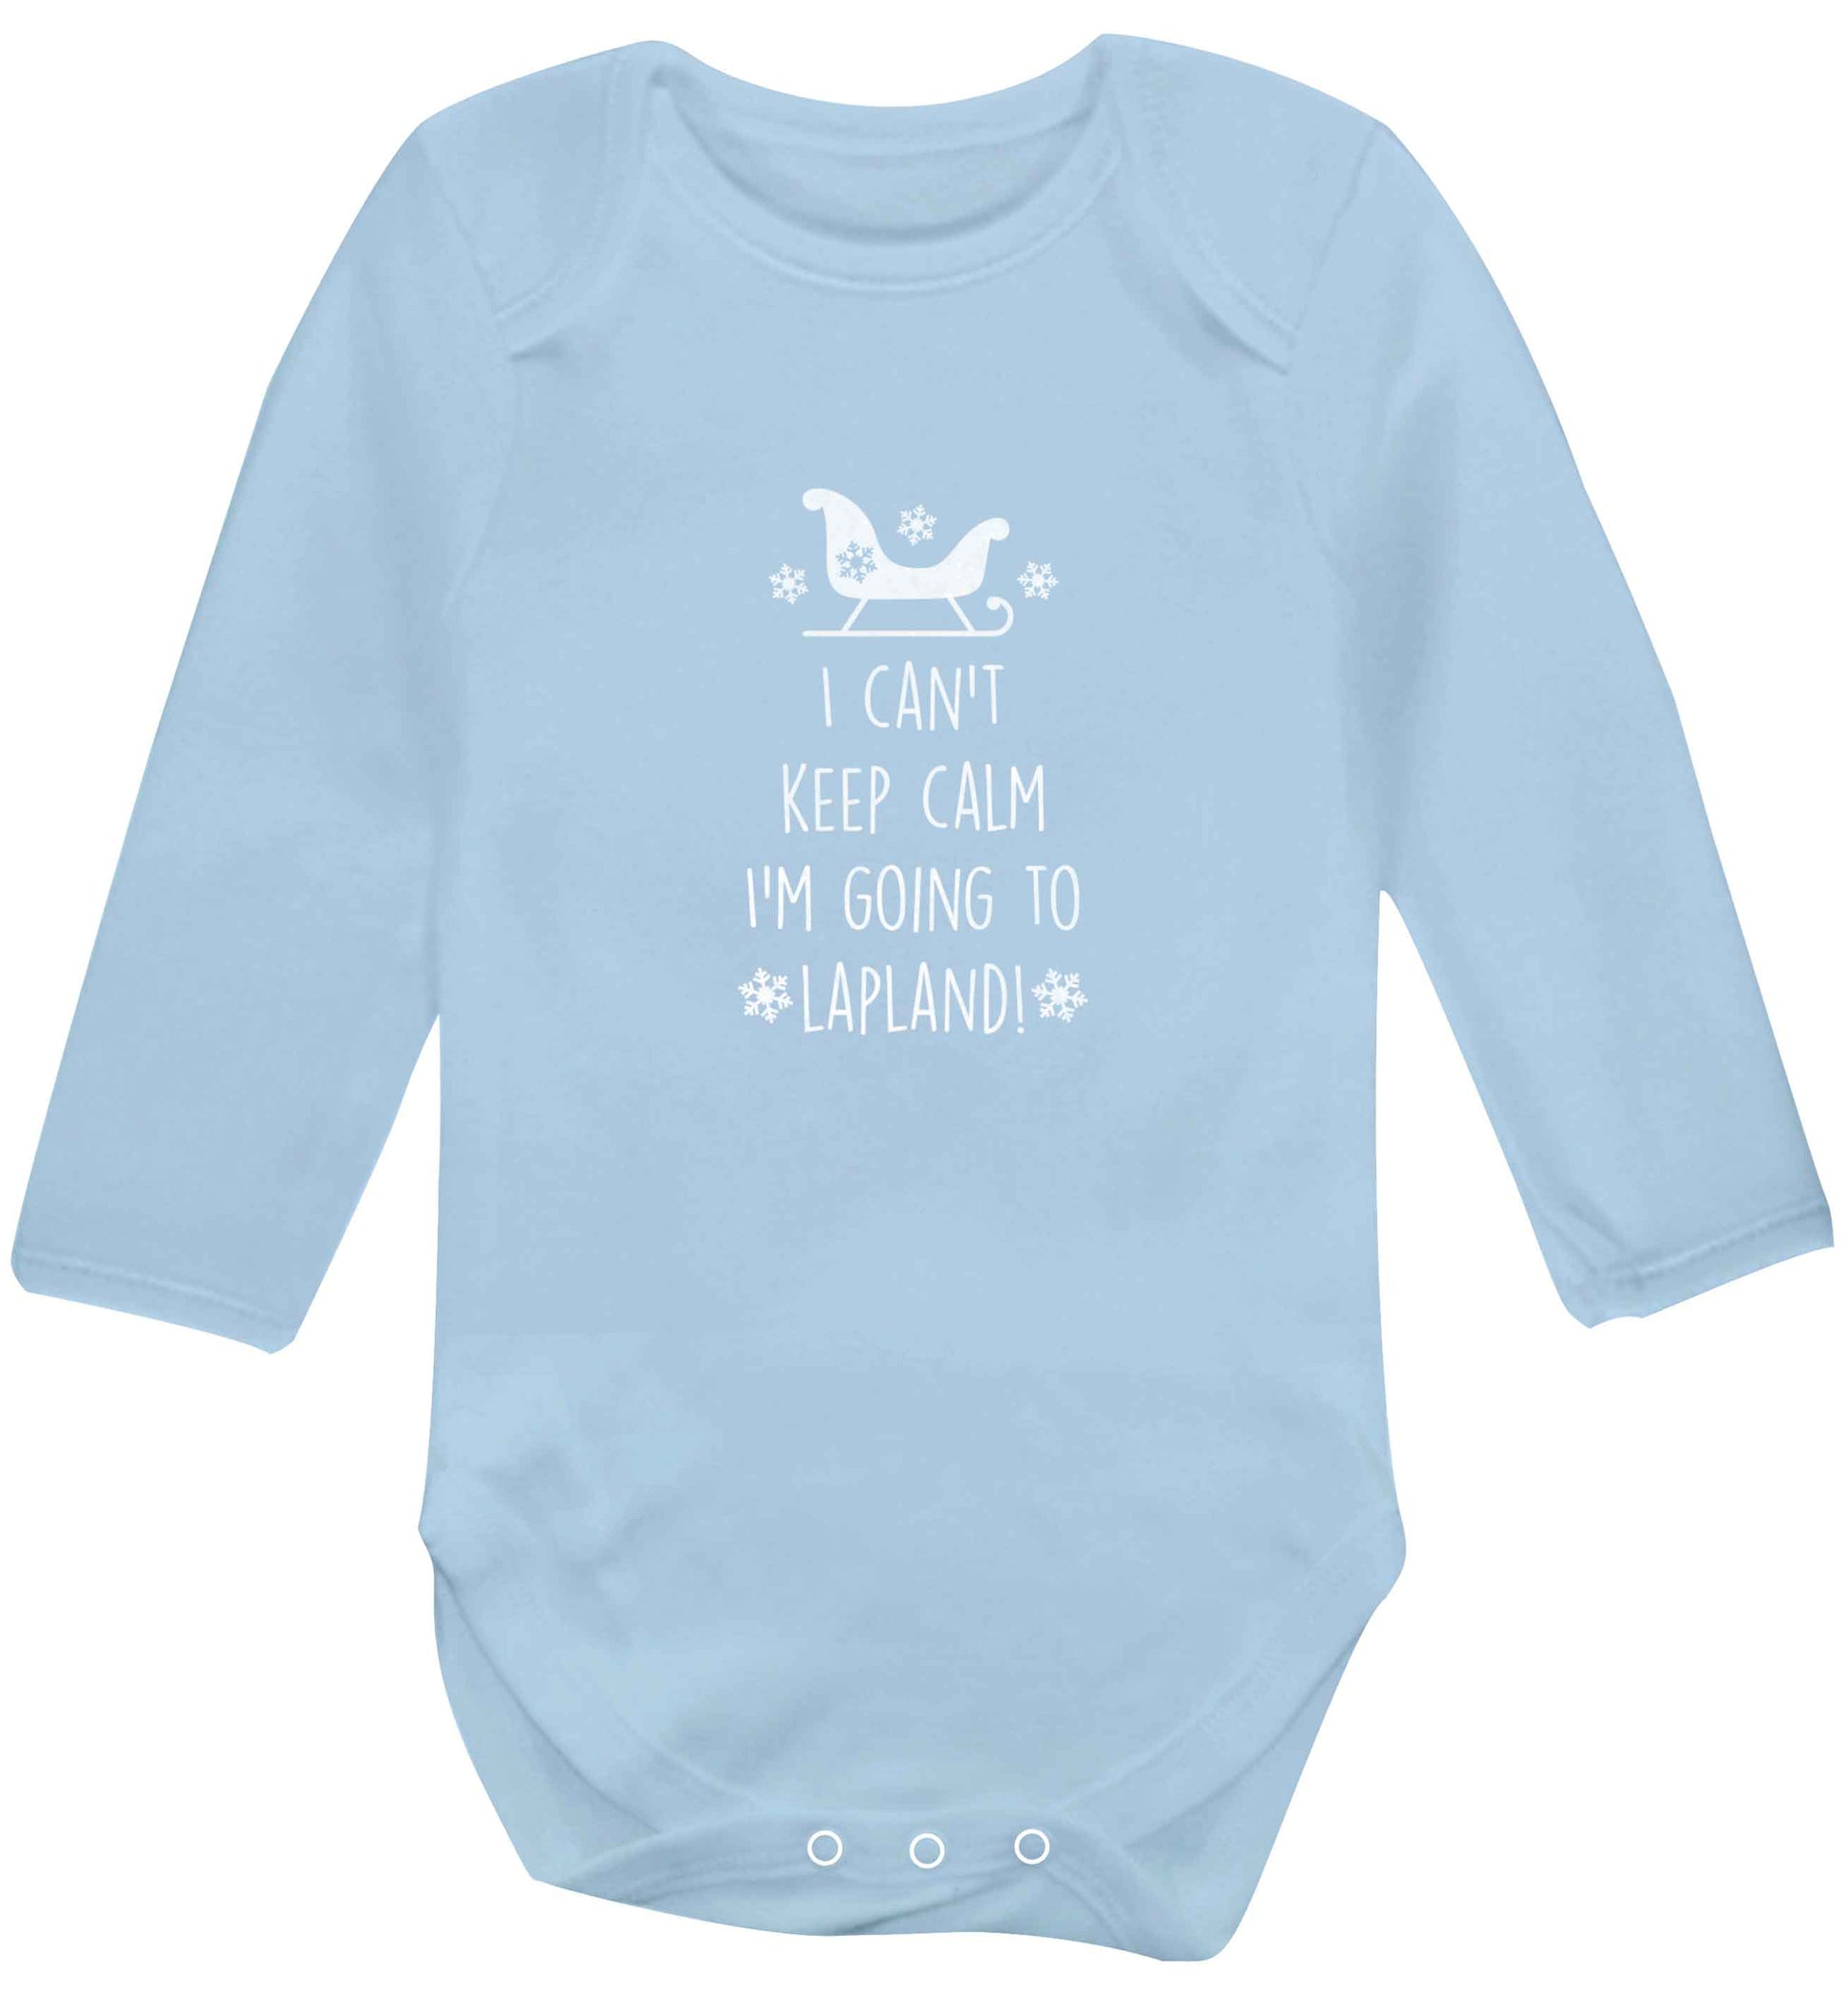 I can't keep calm I'm going to Lapland baby vest long sleeved pale blue 6-12 months